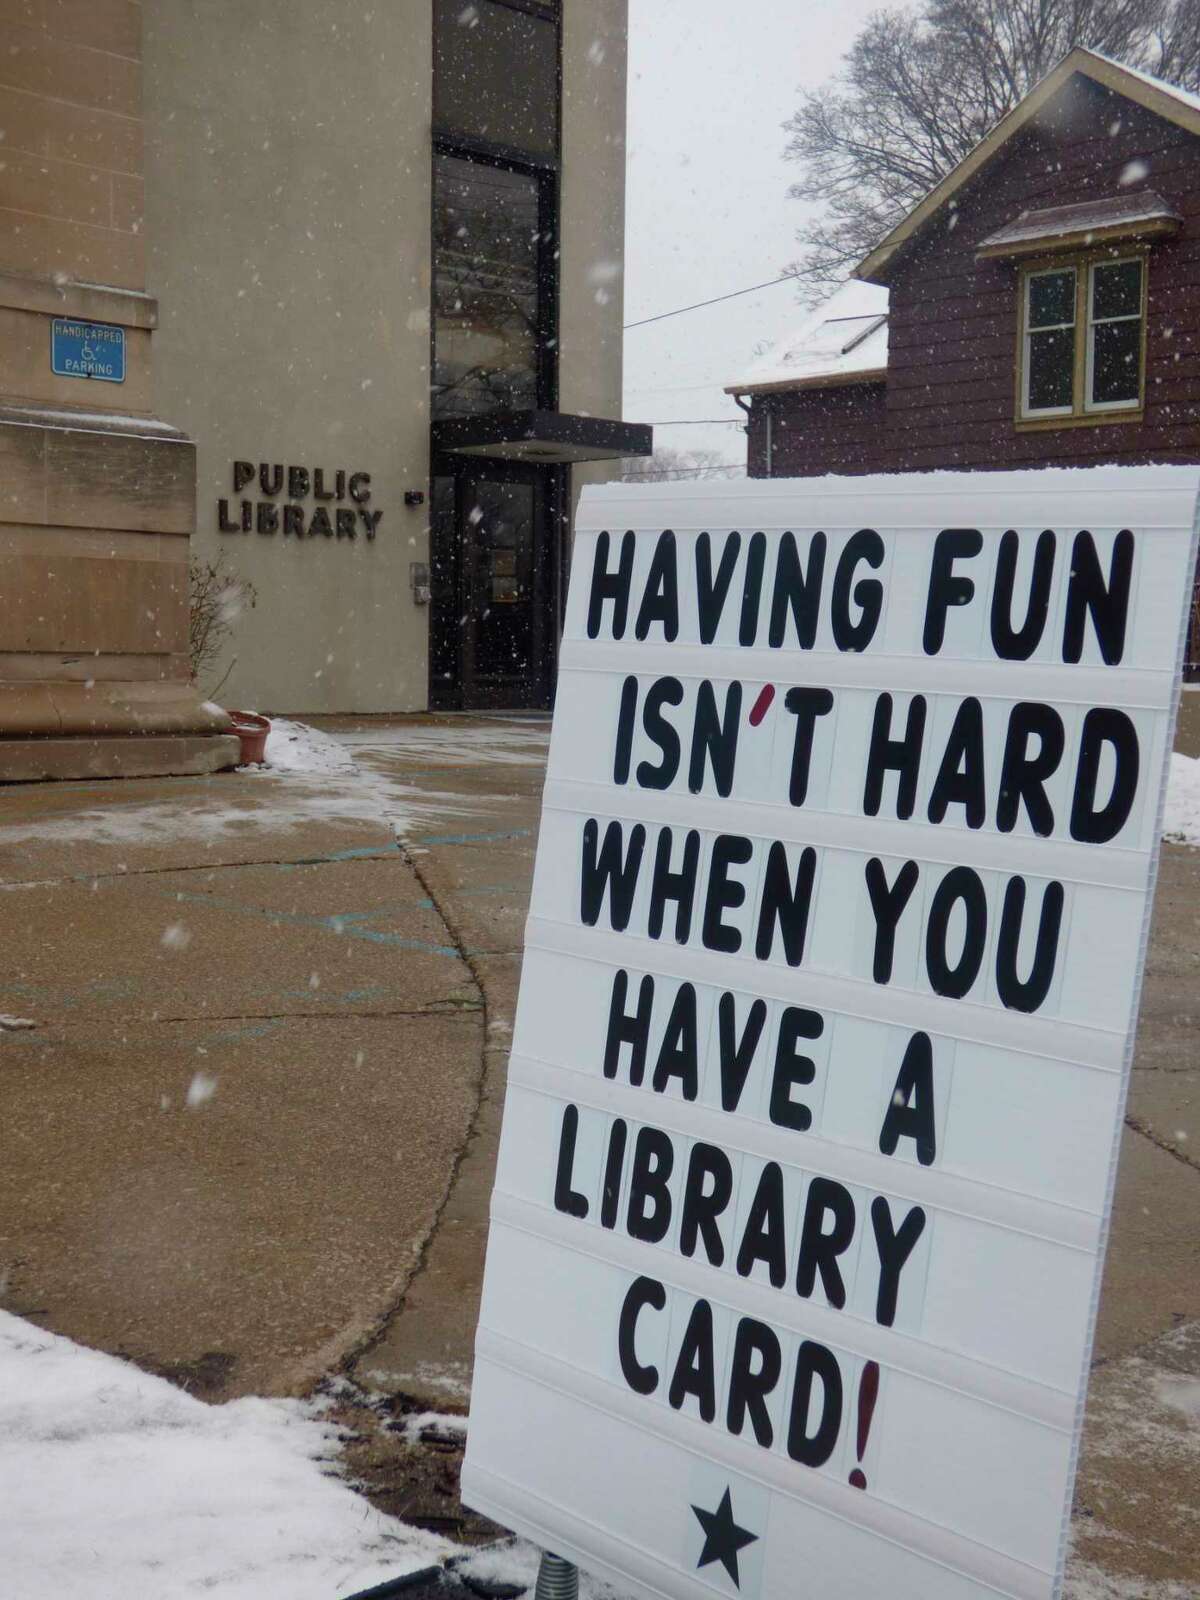 Officials with the Manistee County Library announced an end to late fees starting Feb. 1. (Scott Fraley/News Advocate)